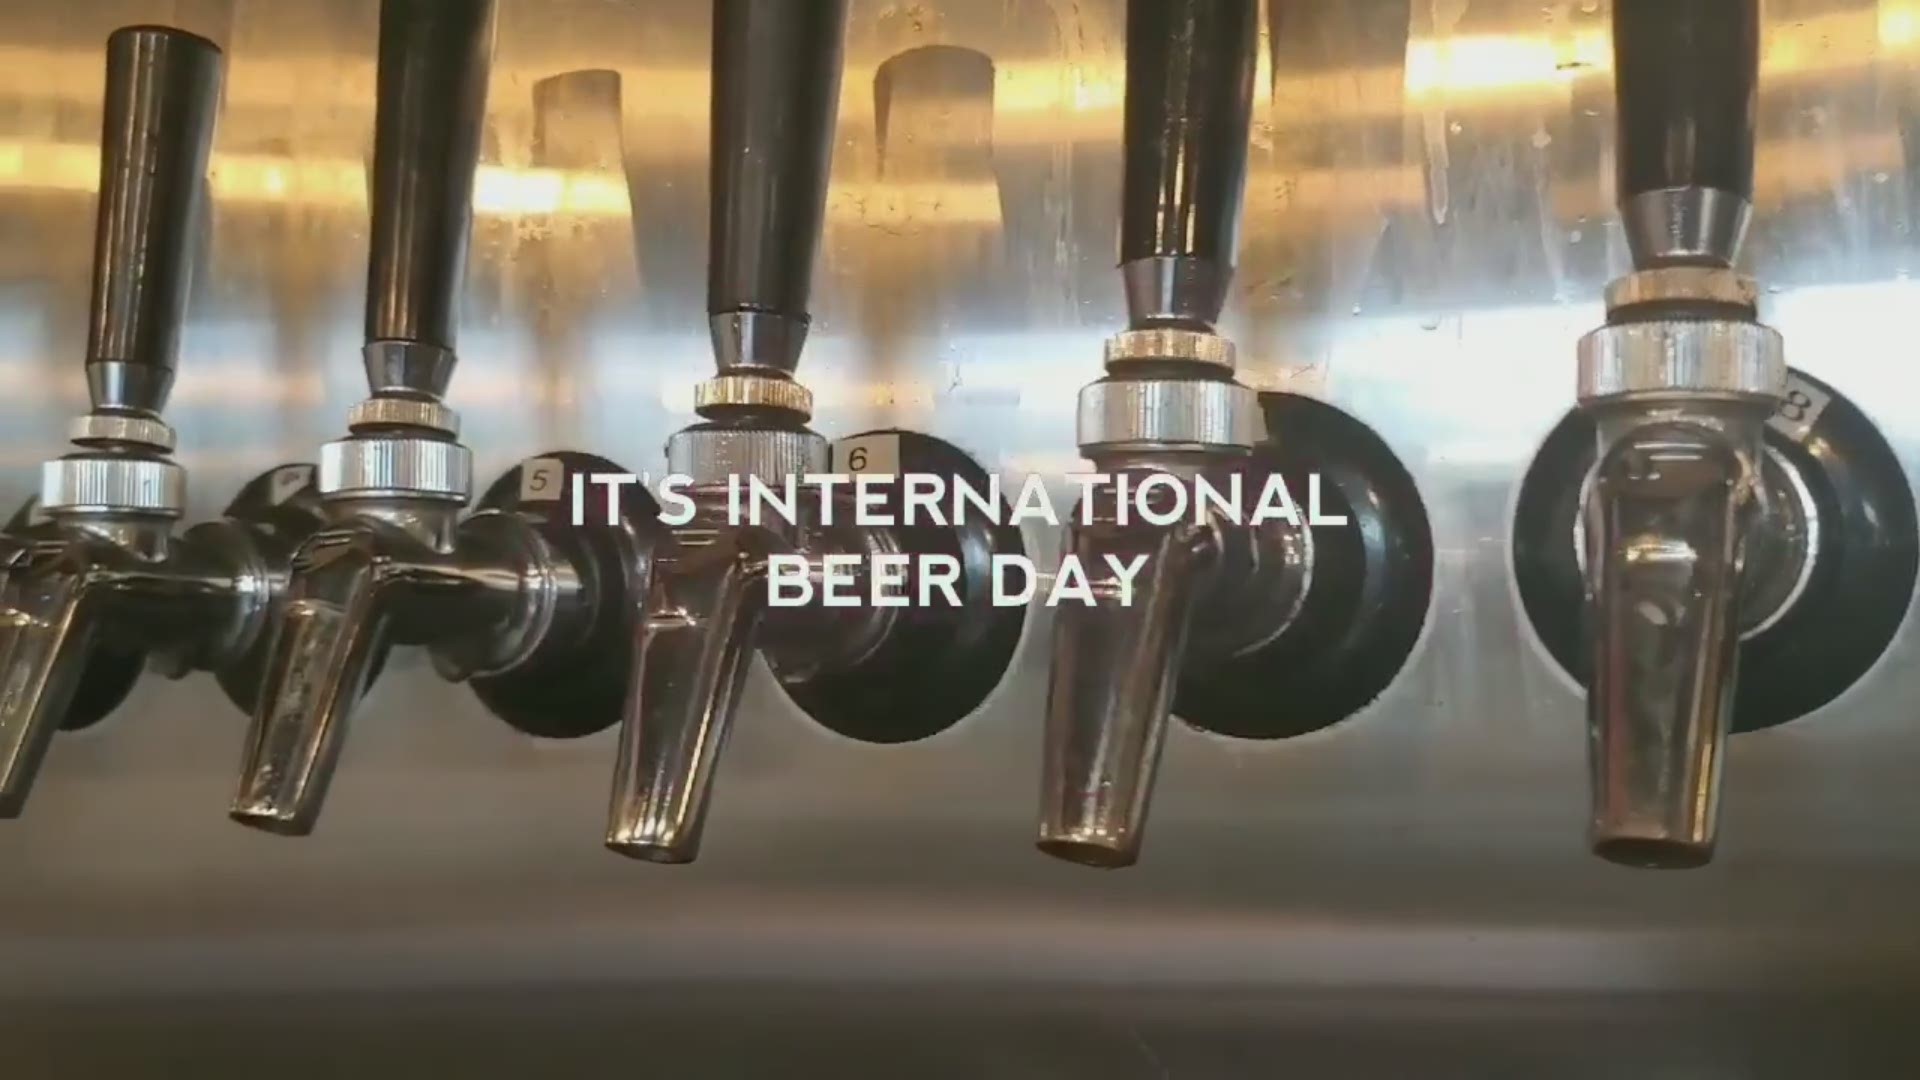 On International Beer Day, the folks at Earnest Brew Works explained how they create their best beers.